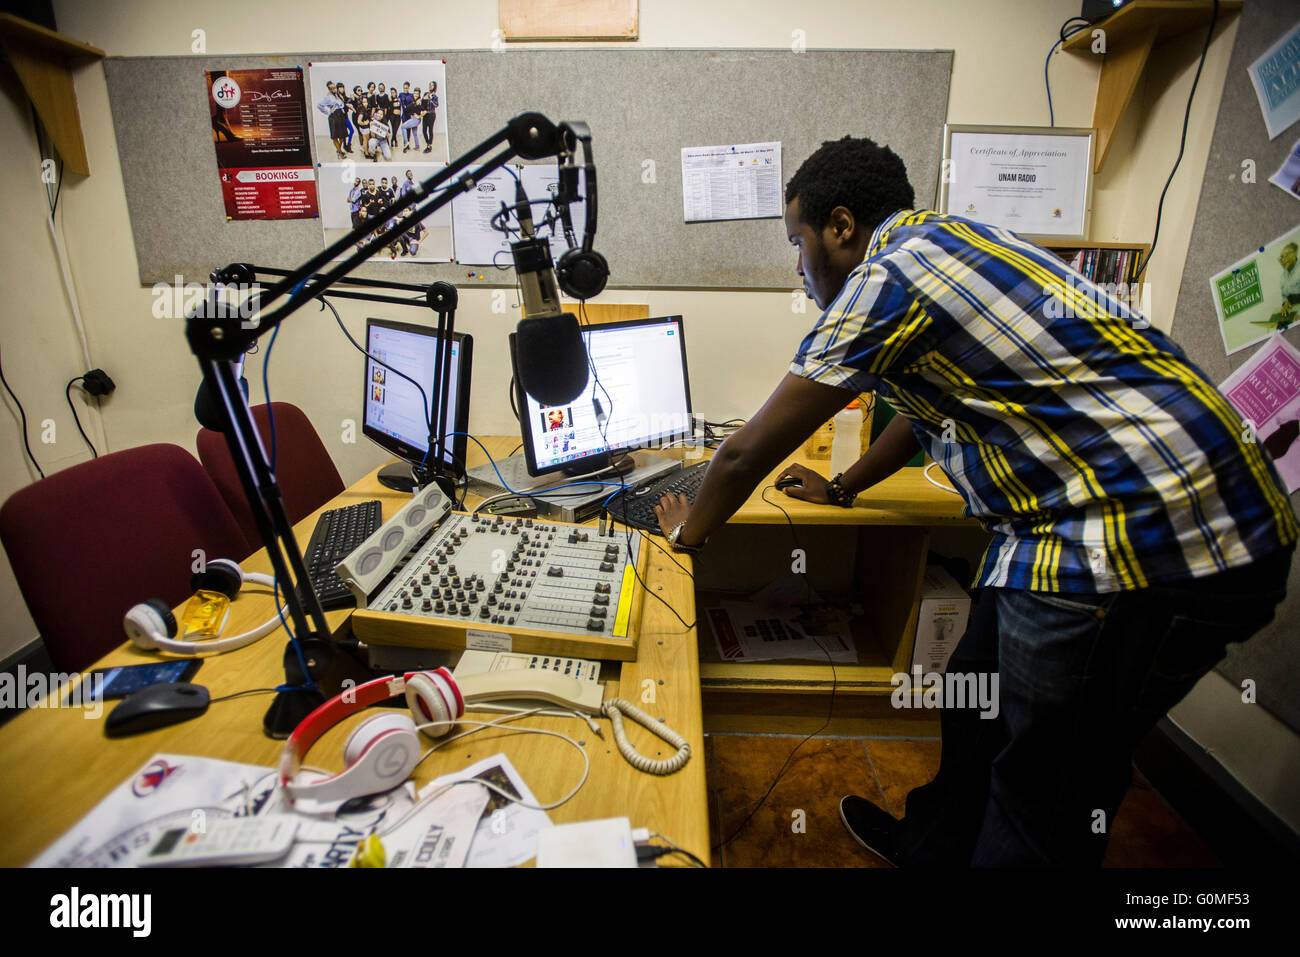 Students of the University of Namibia work as DJs of UNAM Radio 97.4. It  has started its broadcast in 2000. The radio was established as a part of  the University's mission to